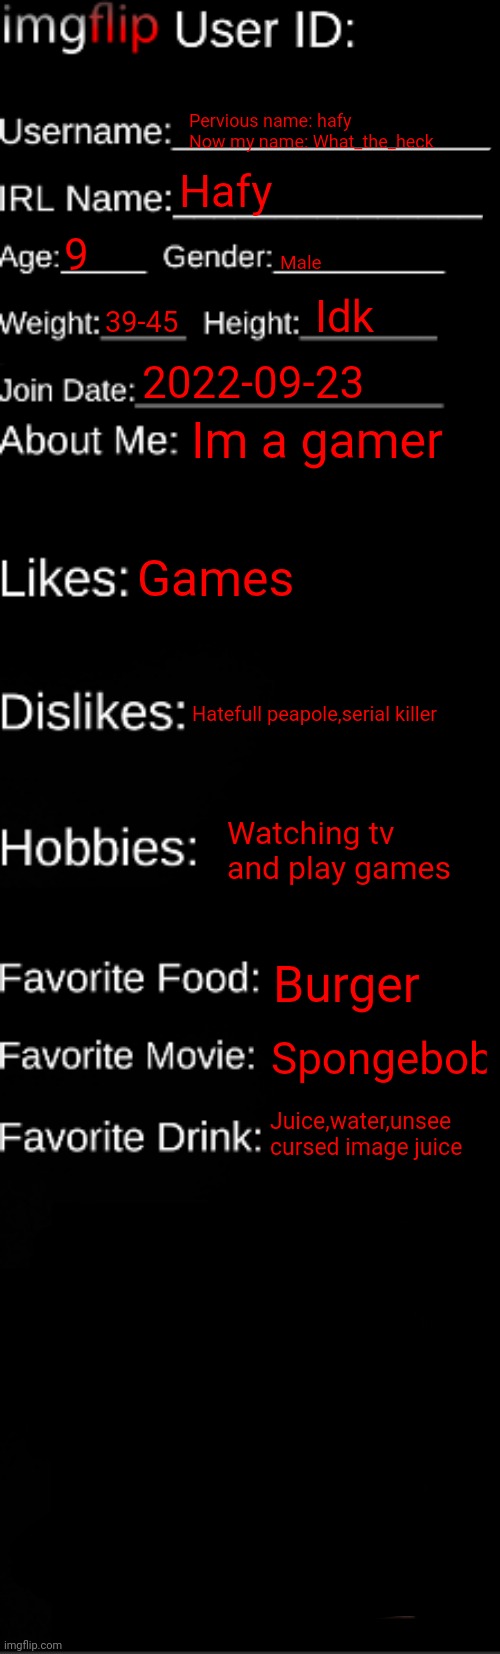 Look at the favorite drink |  Pervious name: hafy 
Now my name: What_the_heck; Hafy; 9; Male; Idk; 39-45; 2022-09-23; Im a gamer; Games; Hatefull peapole,serial killer; Watching tv and play games; Burger; Spongebob; Juice,water,unsee cursed image juice | image tagged in imgflip id card | made w/ Imgflip meme maker